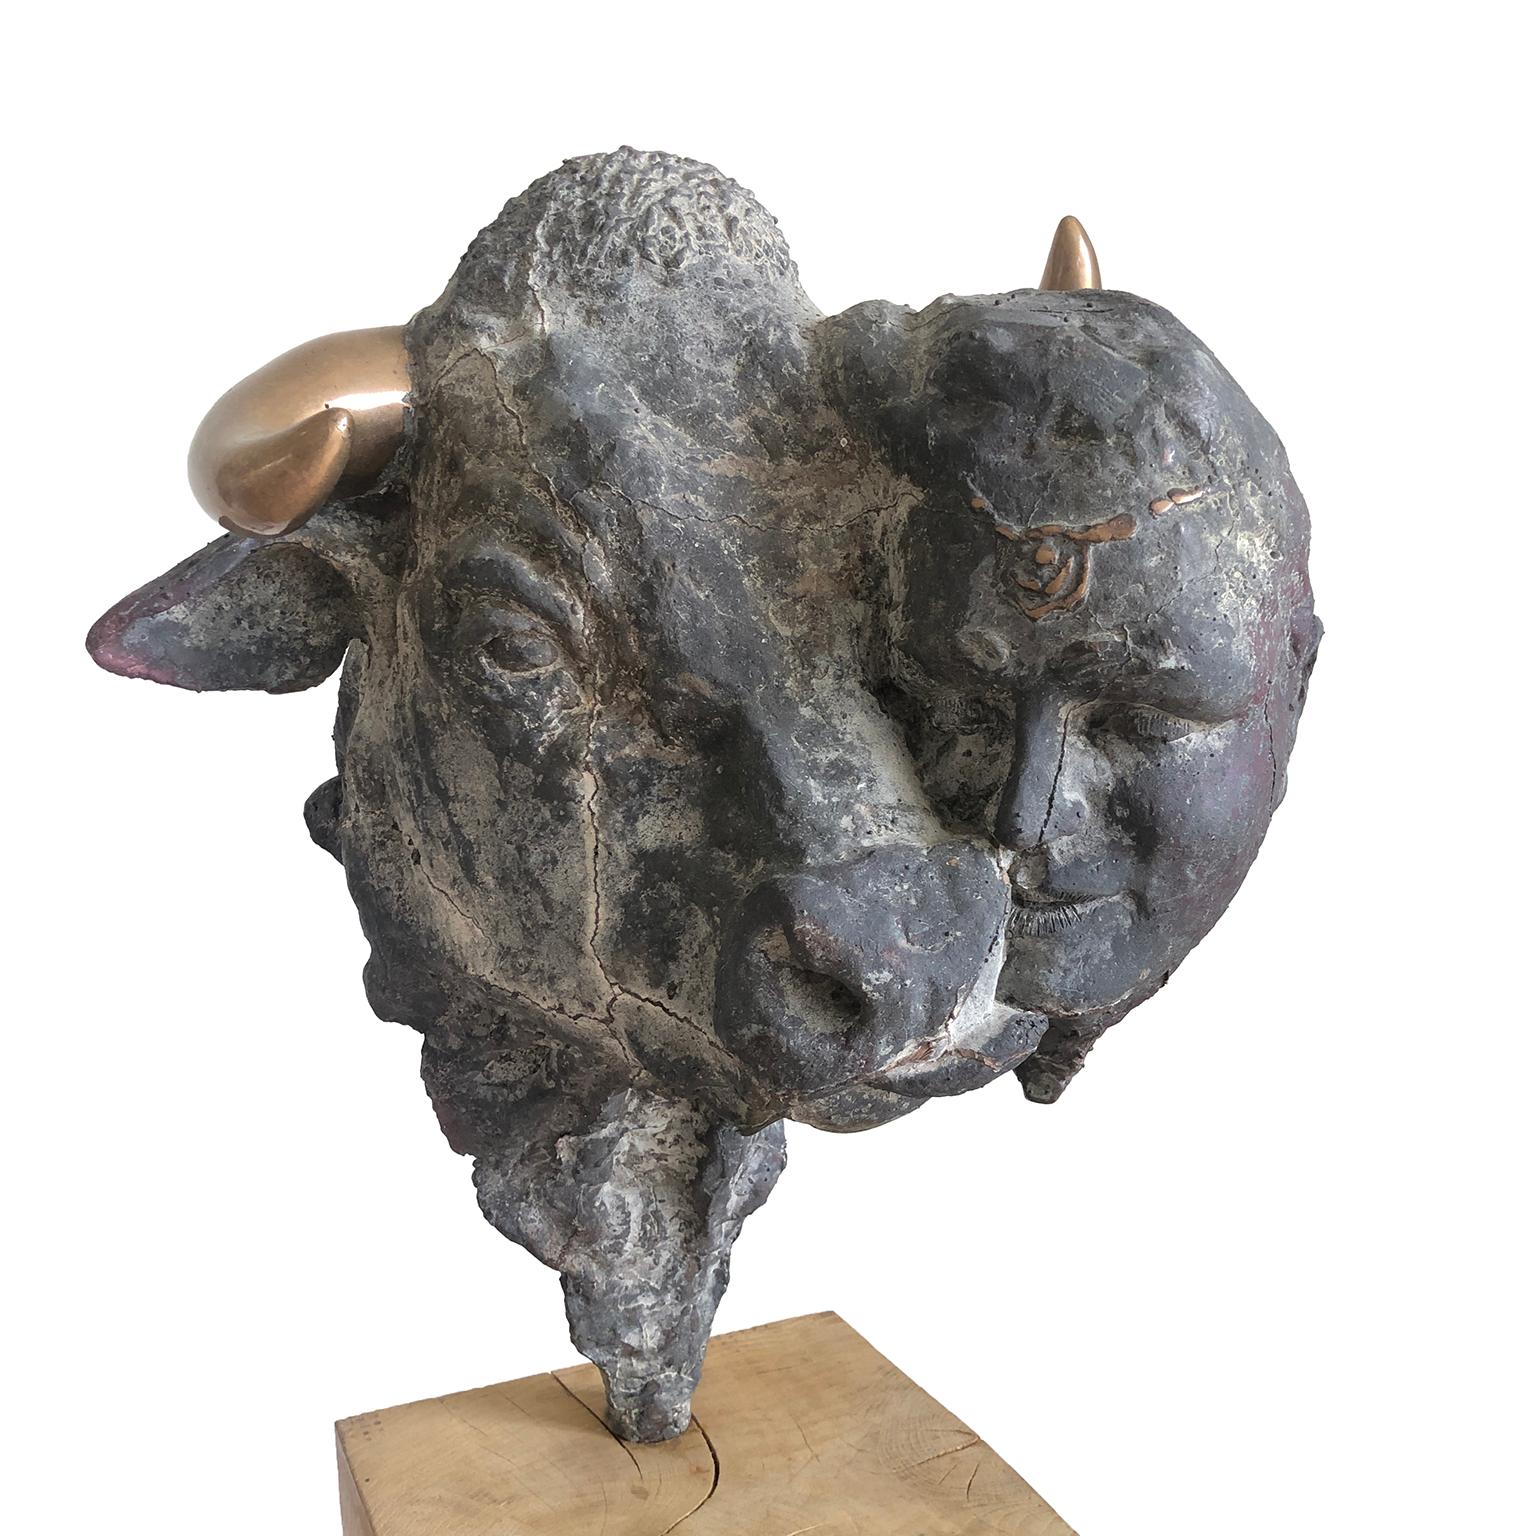 Figurative Bronze Contemporary Sculpture: Europe e il Torro   Godfried Dols

Dols was born in 1958. Godfried developed himself from his 18th until his 30th as an self-taught ceramist and potter. A period of twenty years followed, in which creating